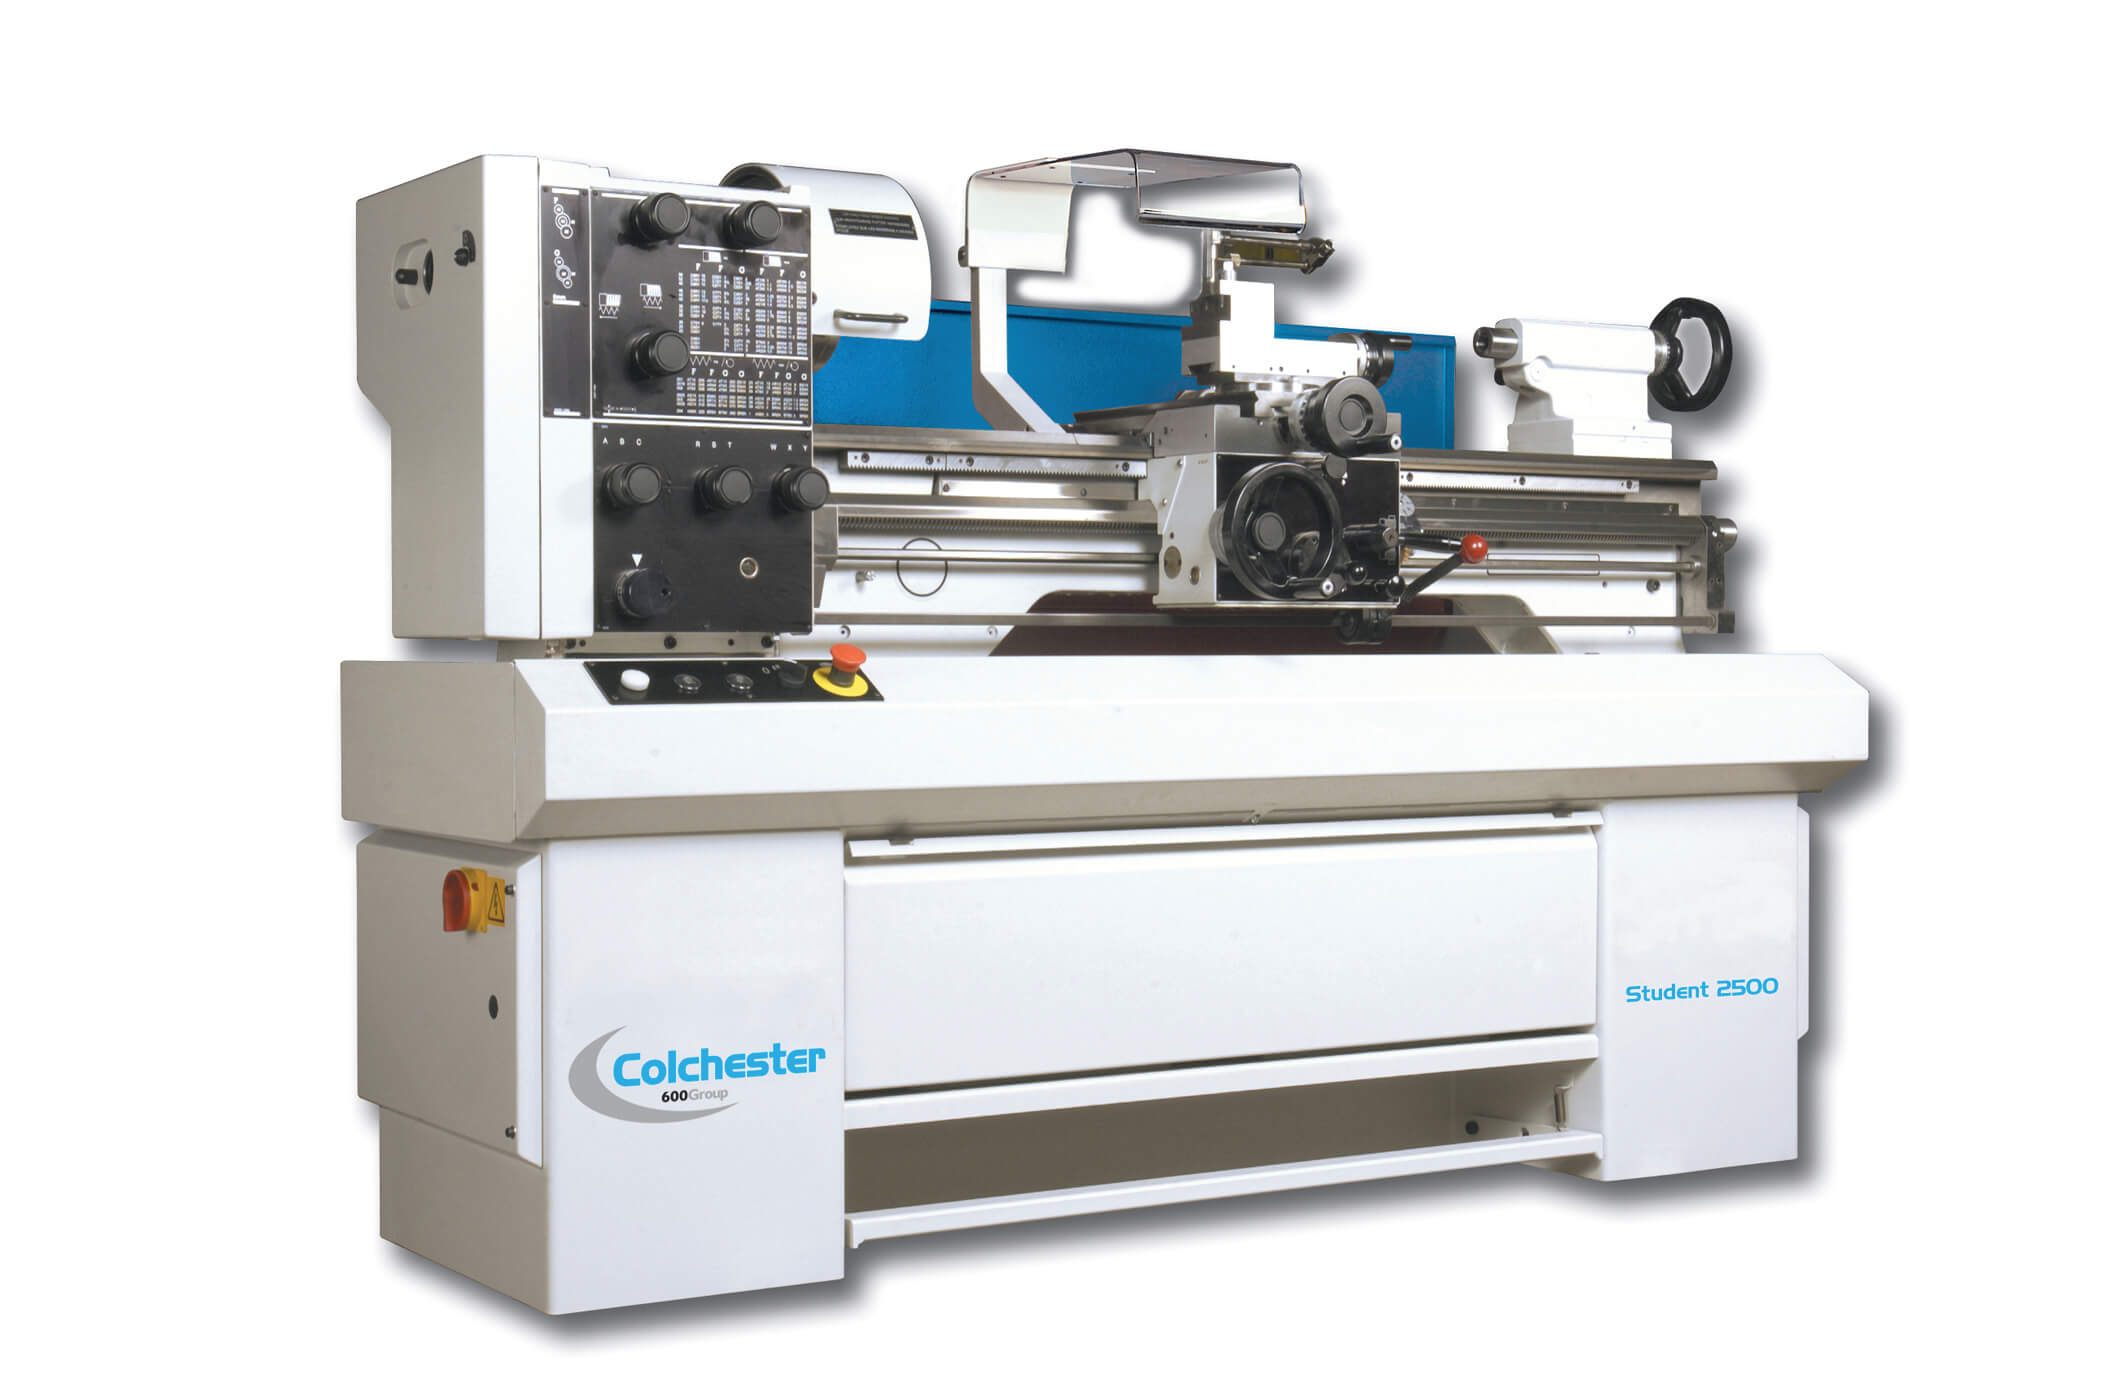 Colchester Student 2500 Engineering Lathe - 635mm bed - Single Phase